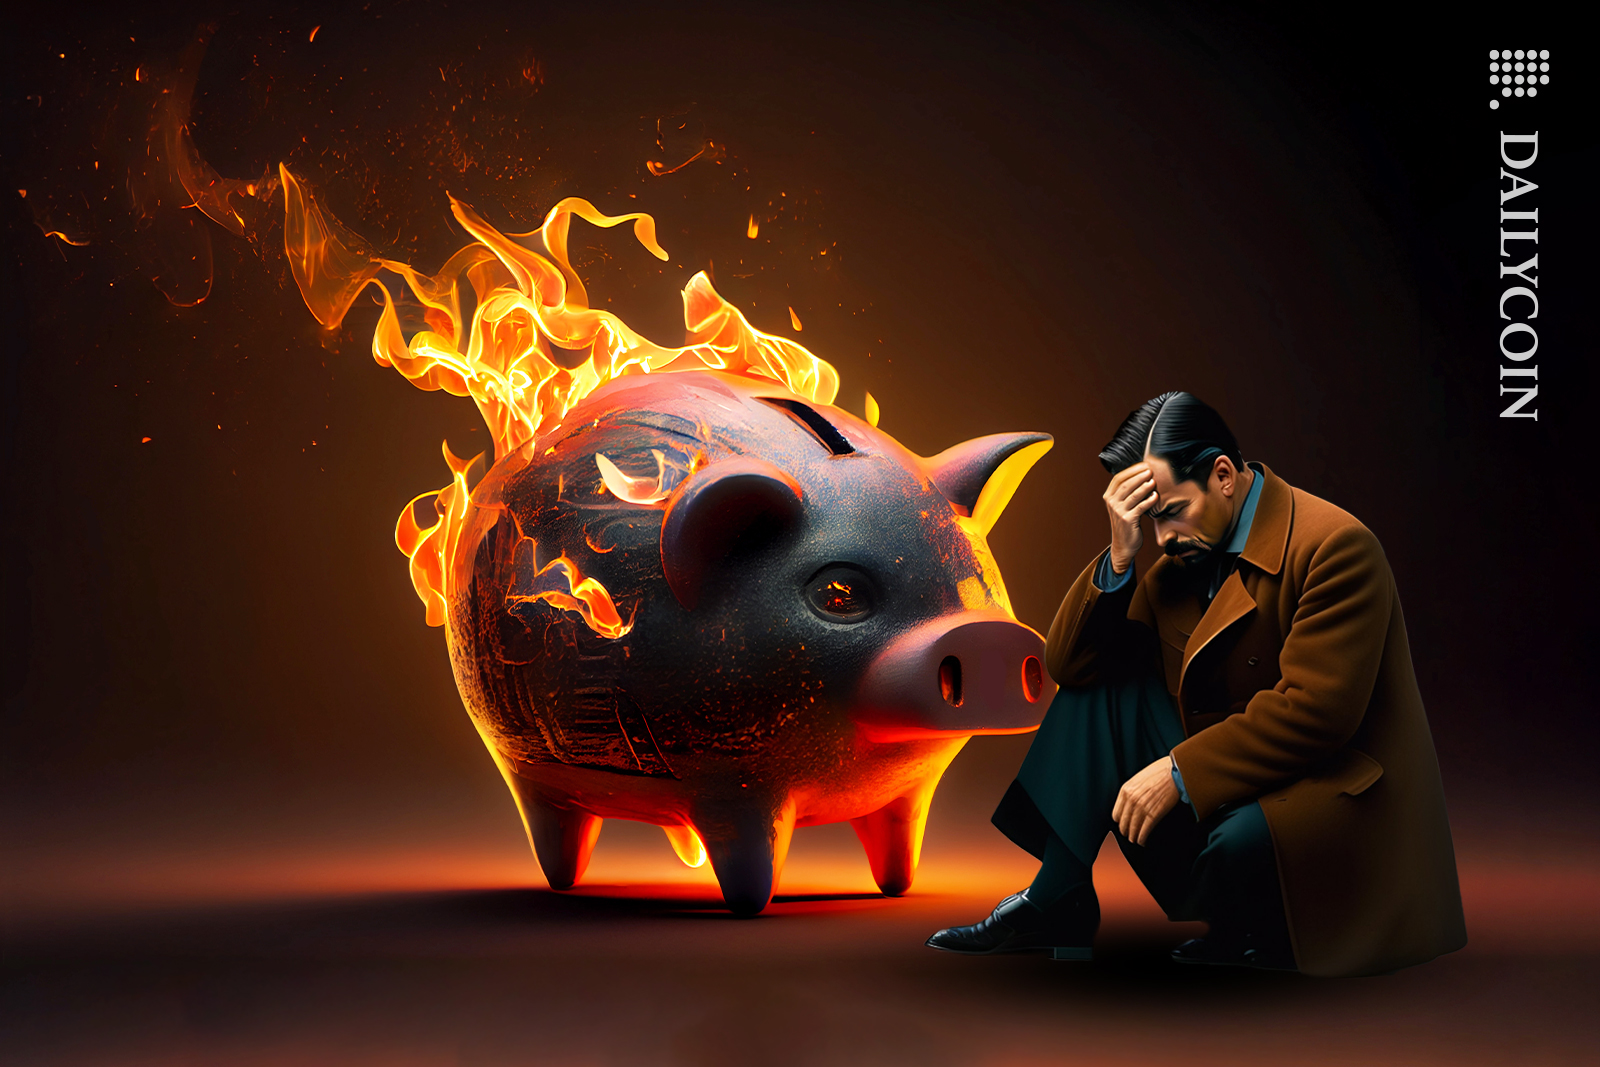 Man kneeling next to piggy bank on fire looking disappointed.